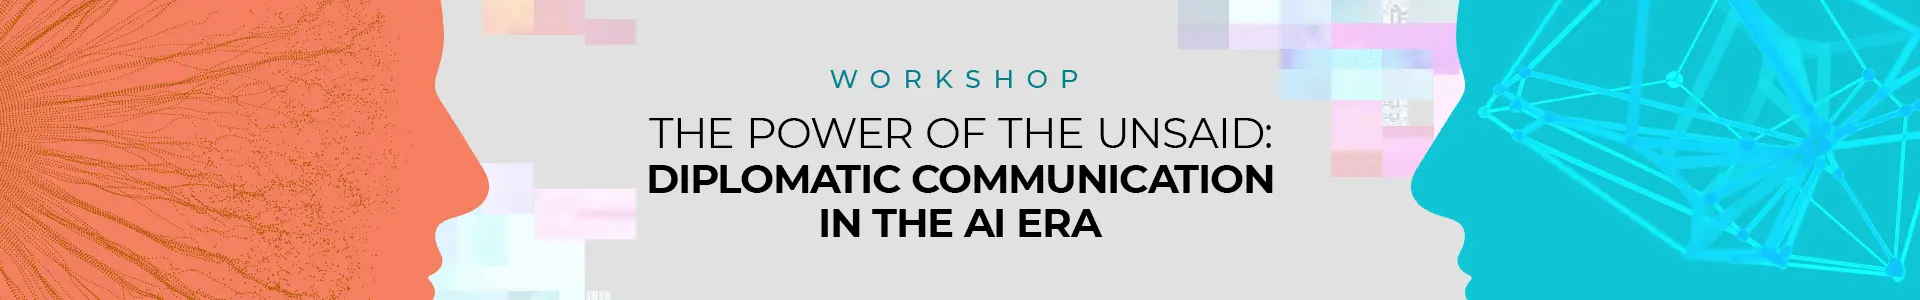 Workshop: The Power of the Unsaid – Diplomatic Communication in the AI Era